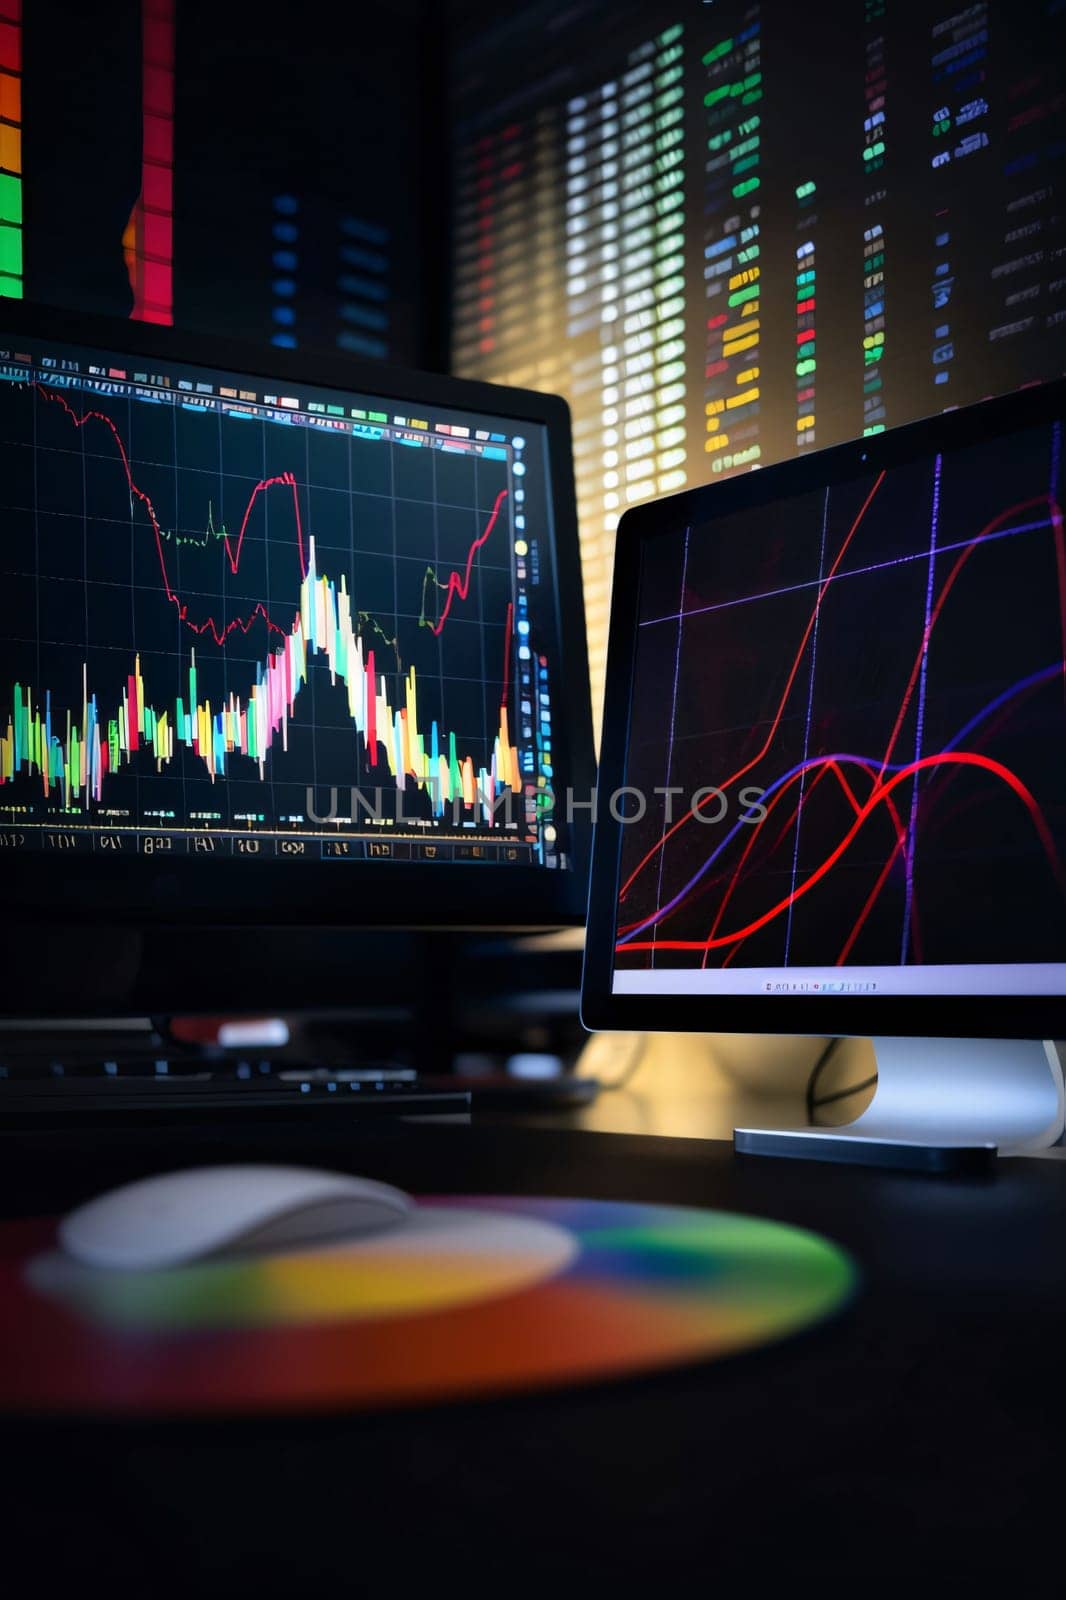 Stock Market: Stock market or forex trading graph suitable for financial investment concept. Economy trends background for business idea and all art work design. Abstract finance background.